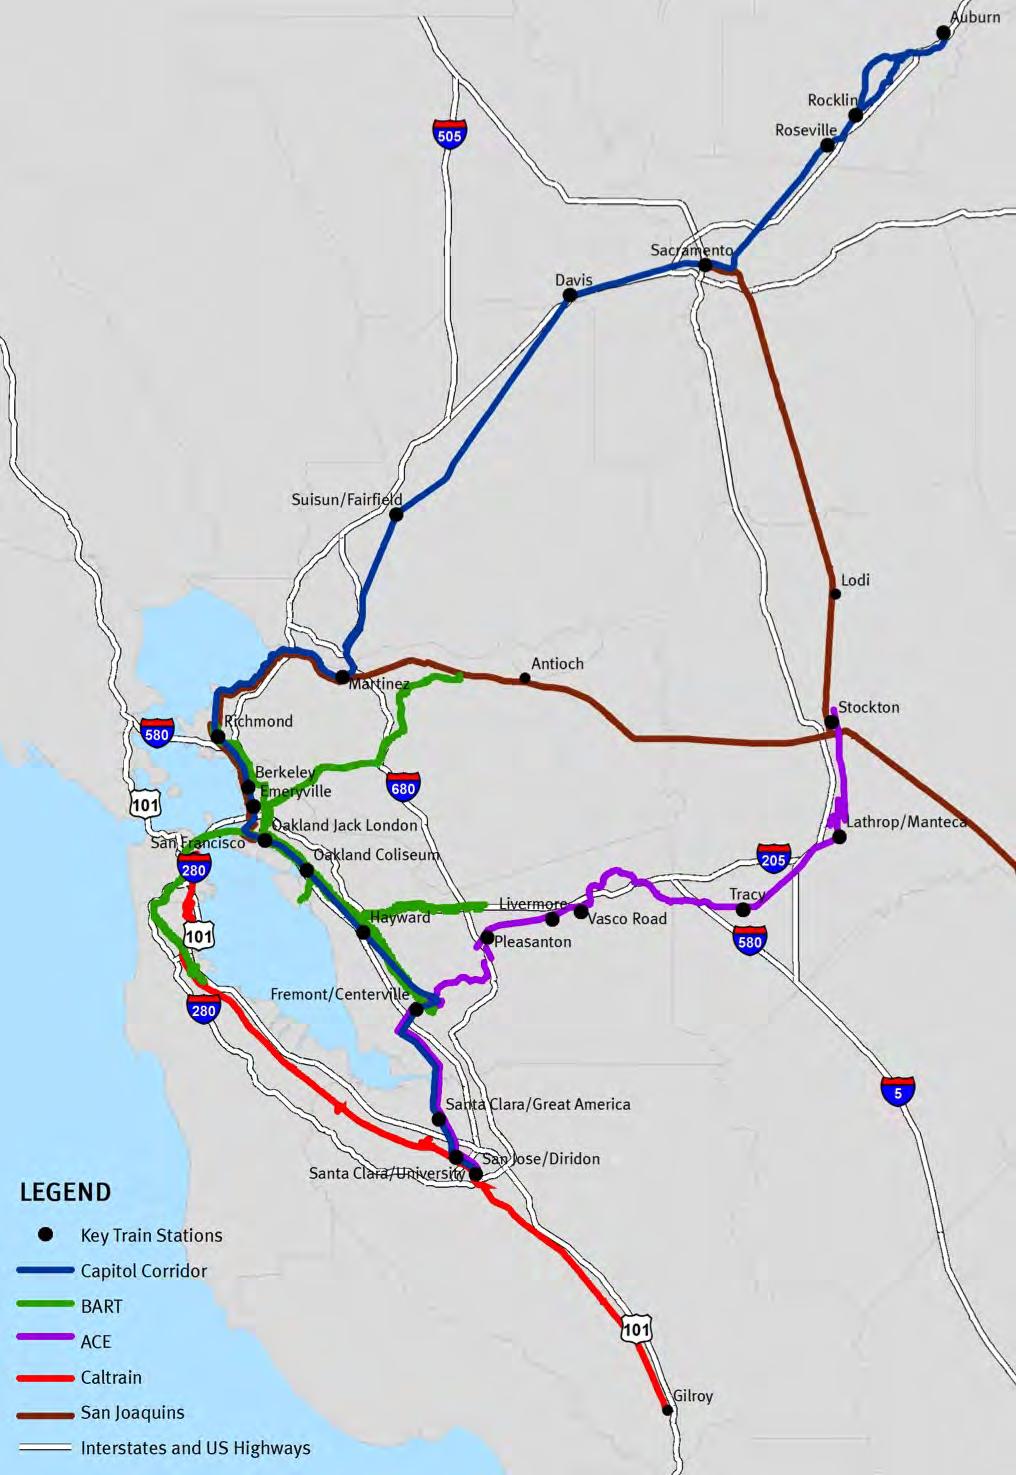 Rail Lines Have Limited Options to Serve More Riders Altamont